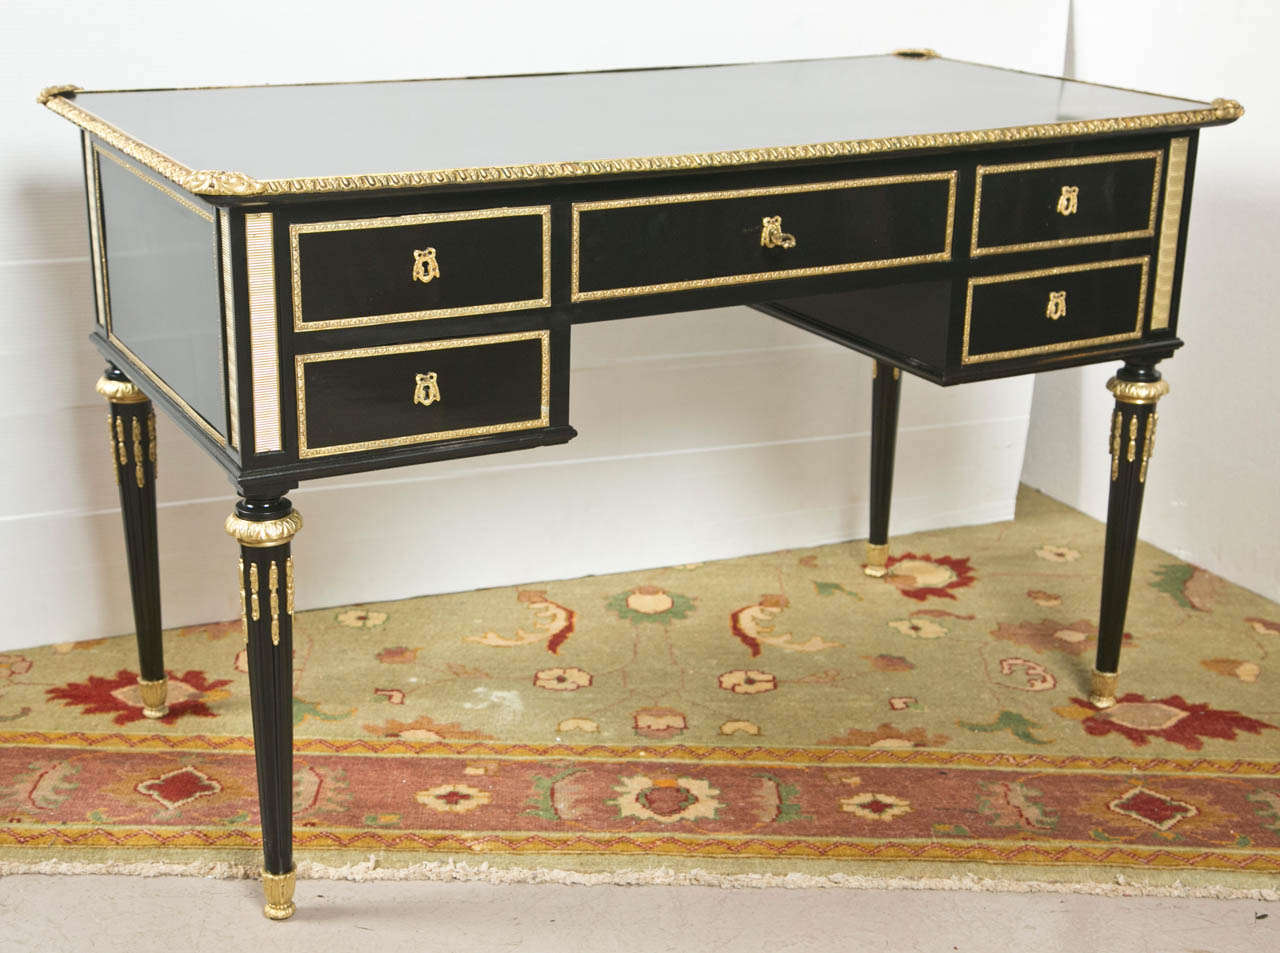 French ebonized bureau plat in the taste of Louis XVI, circa 1940's, the top having bronze banding, over a central drawer flanked by two sets of drawers each side, bronze banding throughout, raised on fluted tapering legs ending in bronze caps. By